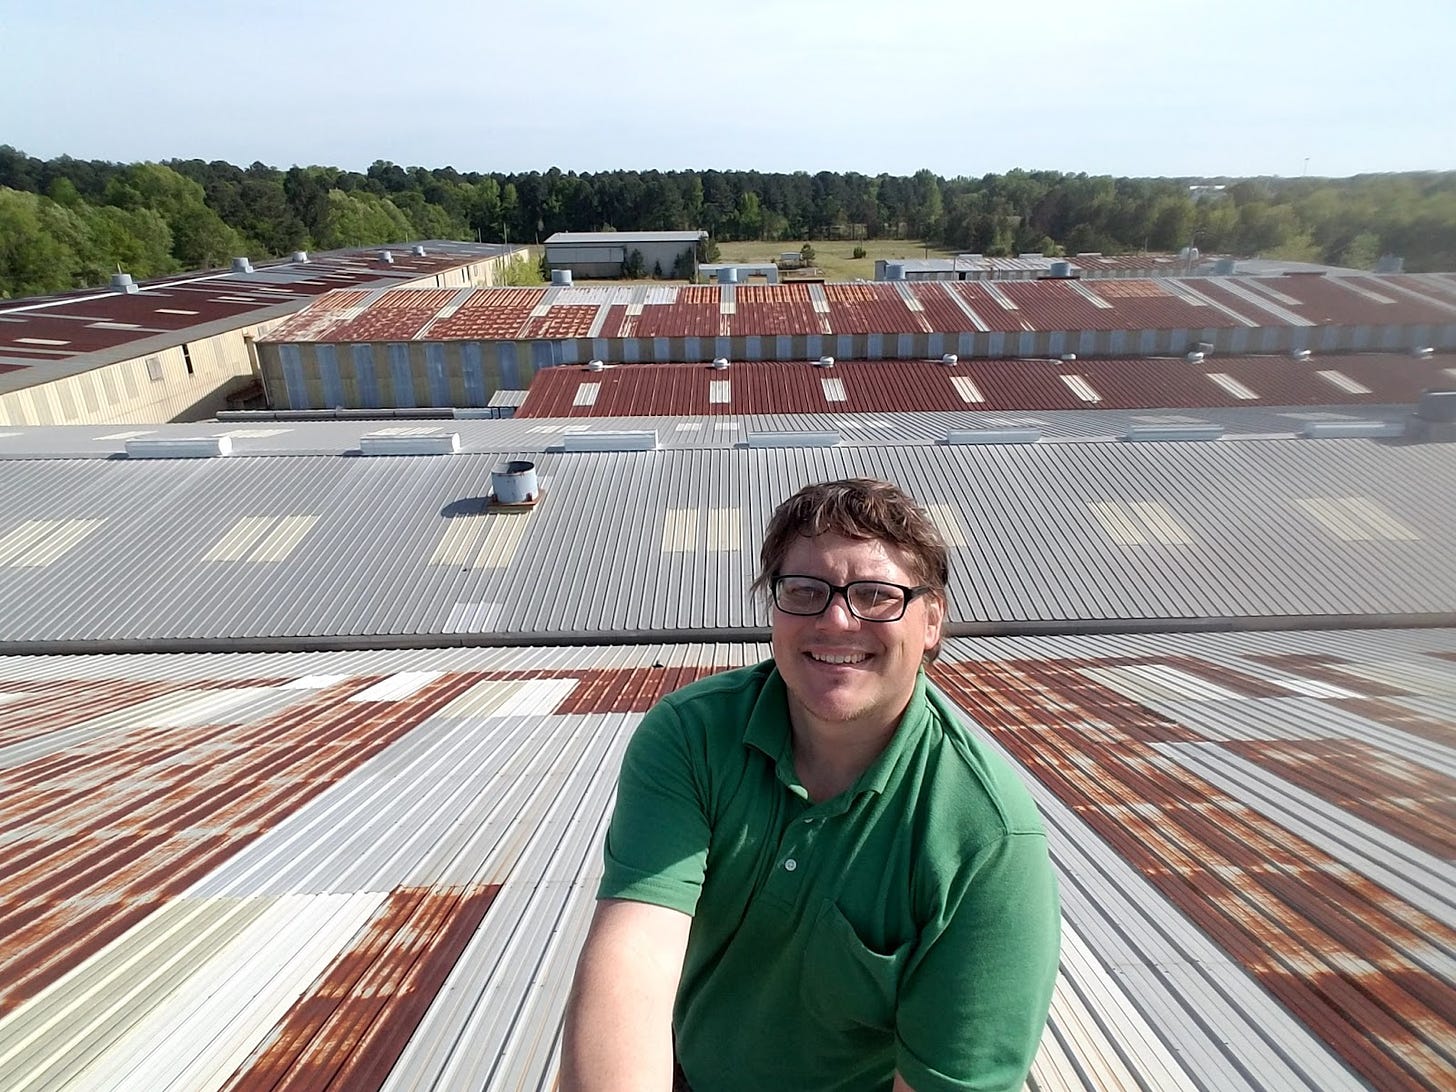 John Fenley poses on top of the roof of his massive compound